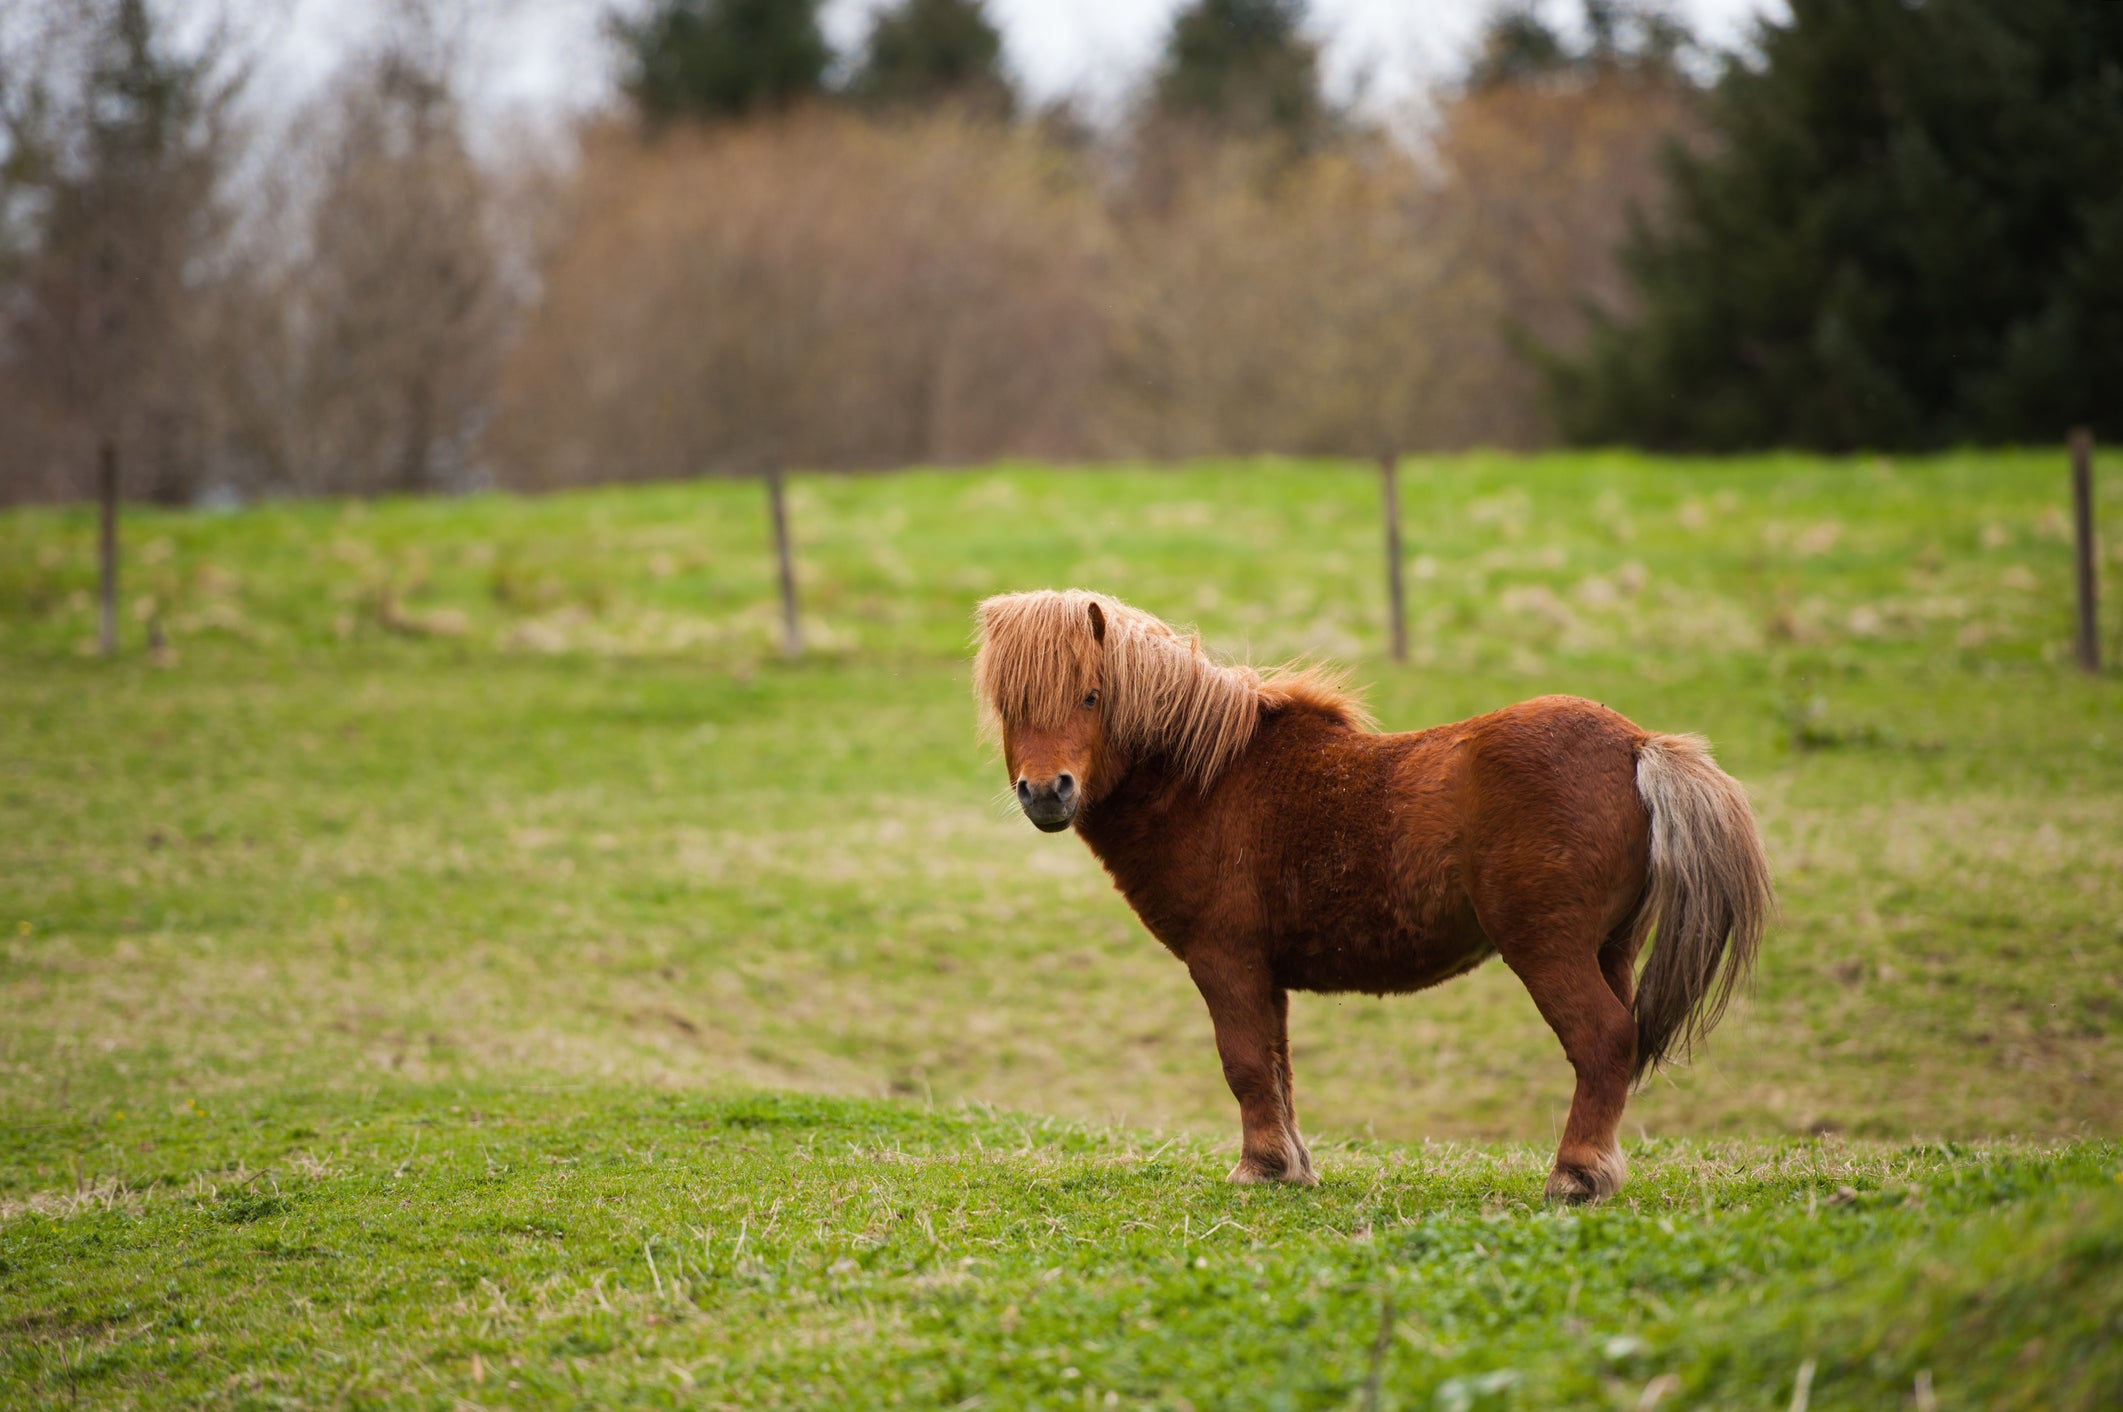 A passenger boarded a plane with a miniature horse